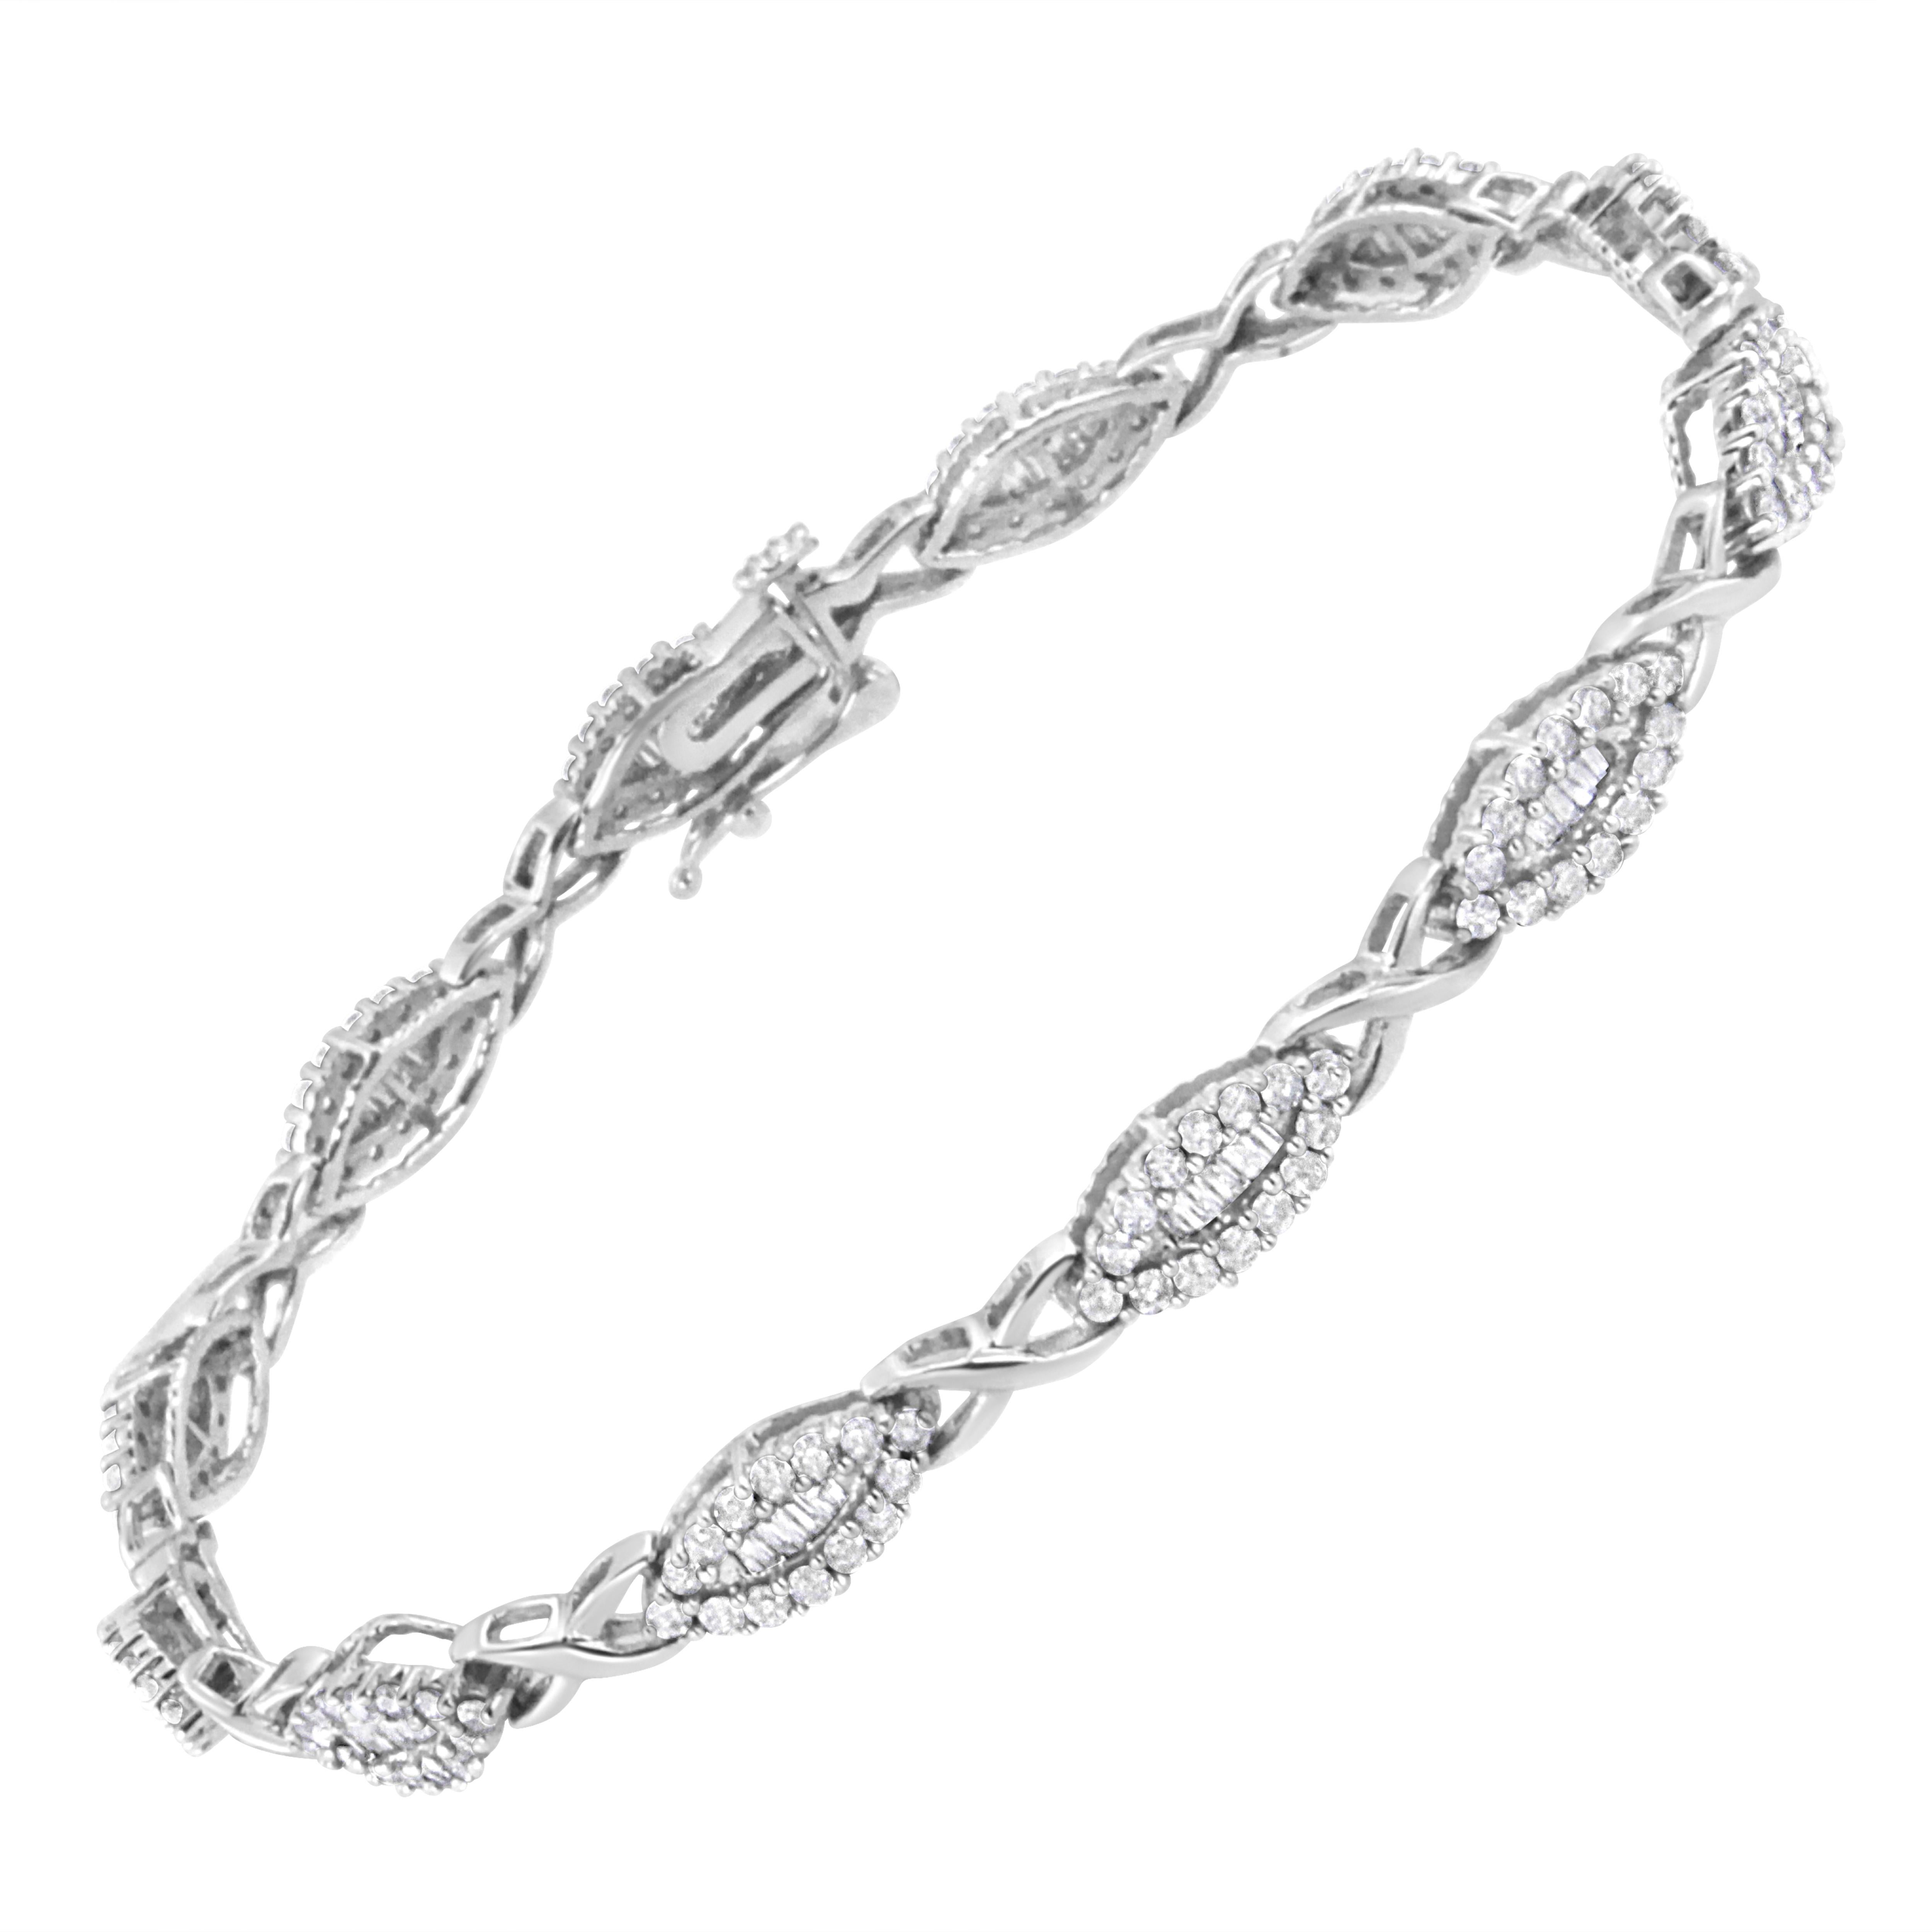 With a breathtaking design, this X-link tennis bracelet is brimming with 2ct of natural, sparkling diamonds. Warm 10k white gold X links alternate with the glimmering diamonds throughout the length of the bracelet finishing it of with a secure box